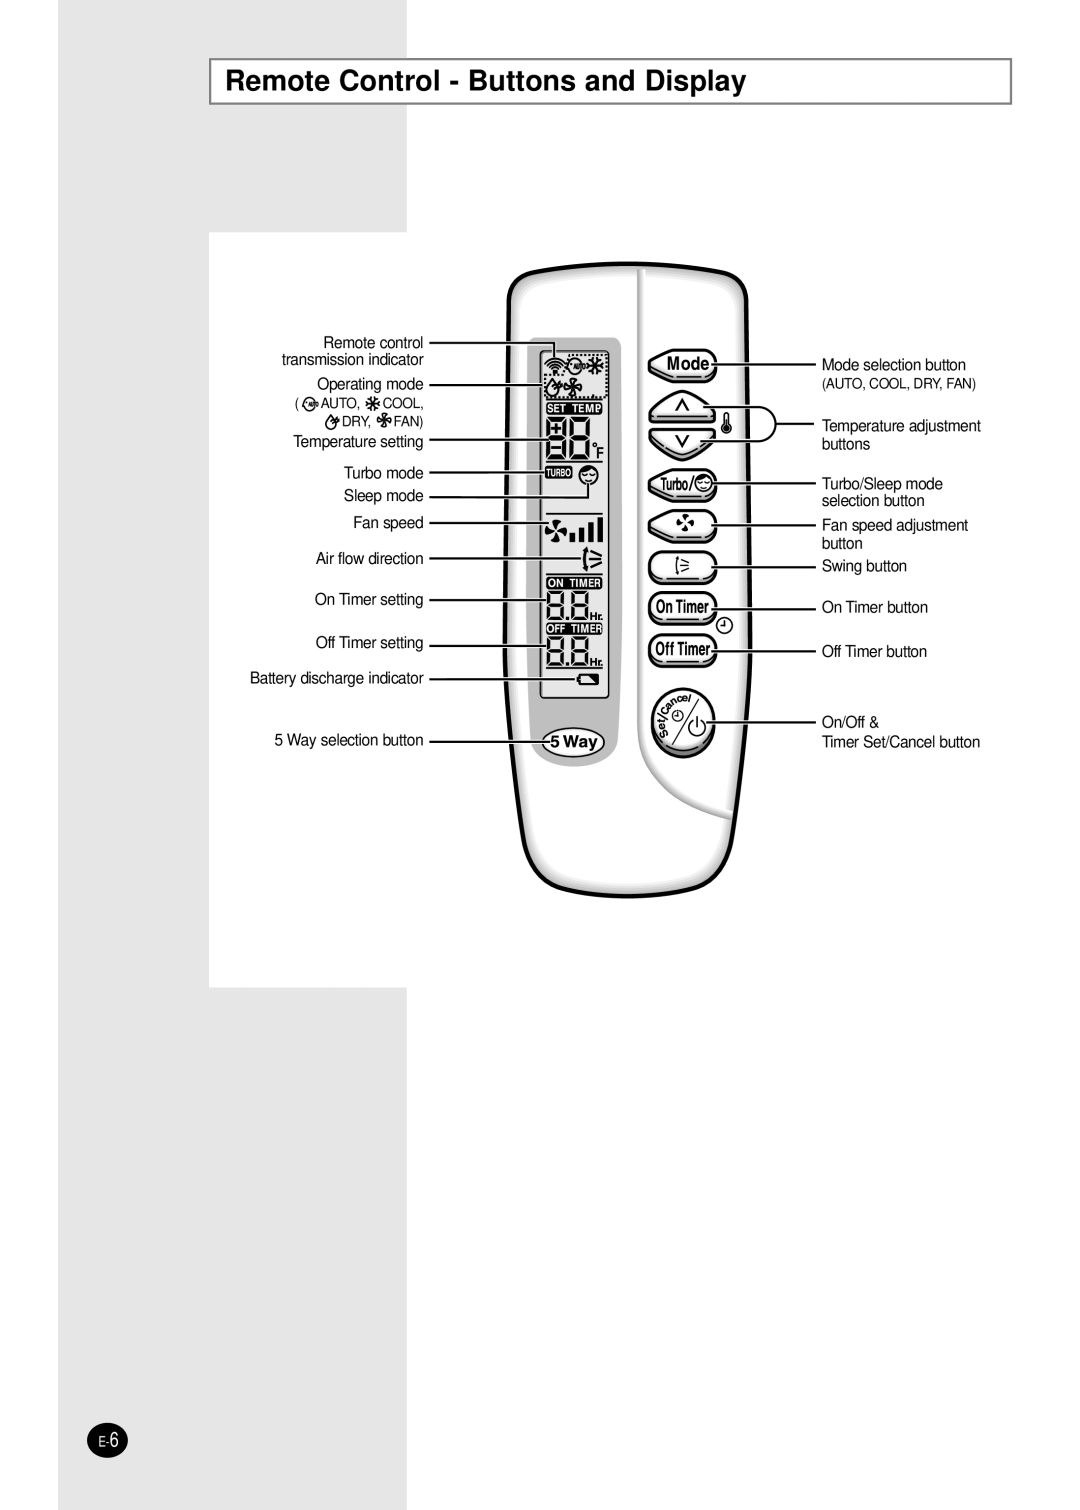 Samsung AS24A1(2)RCD, US24A1(2)RCD, US18A9(0)RCFD, AS18A9(0)RCFD manuel dutilisation Remote Control - Buttons and Display 